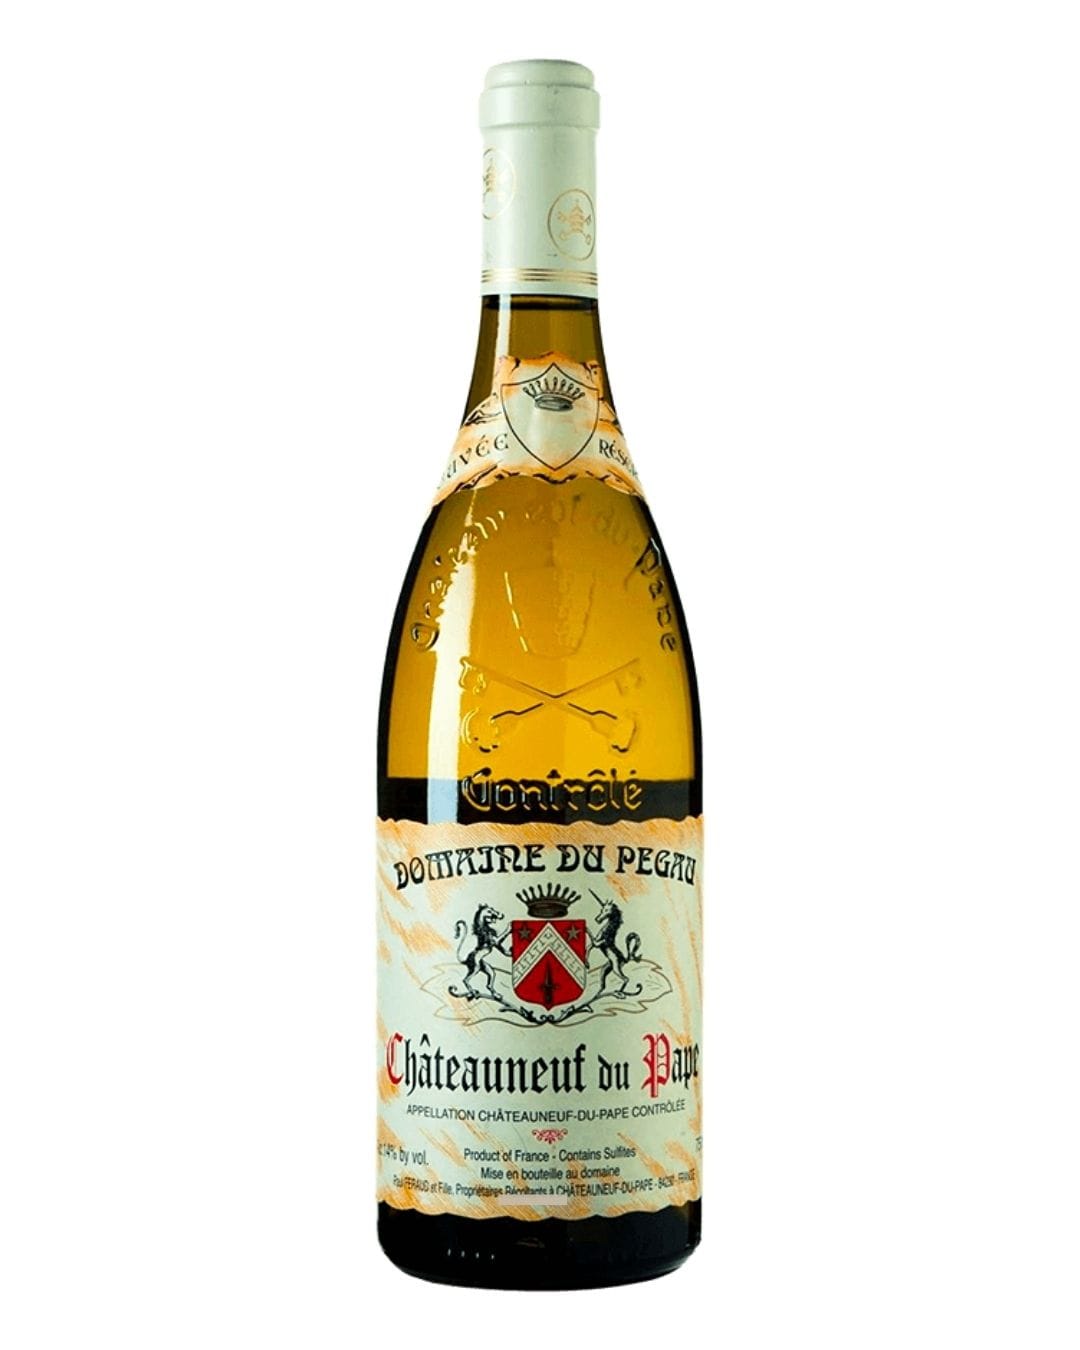 Shop Domaine du Pegau Domaine du Pegau | Chateauneuf-du-Pape Cuvee Reservee Blanc 2018 online at PENTICTON artisanal French wine store in Hong Kong. Discover other French wines, promotions, workshops and featured offers at pentictonpacific.com 